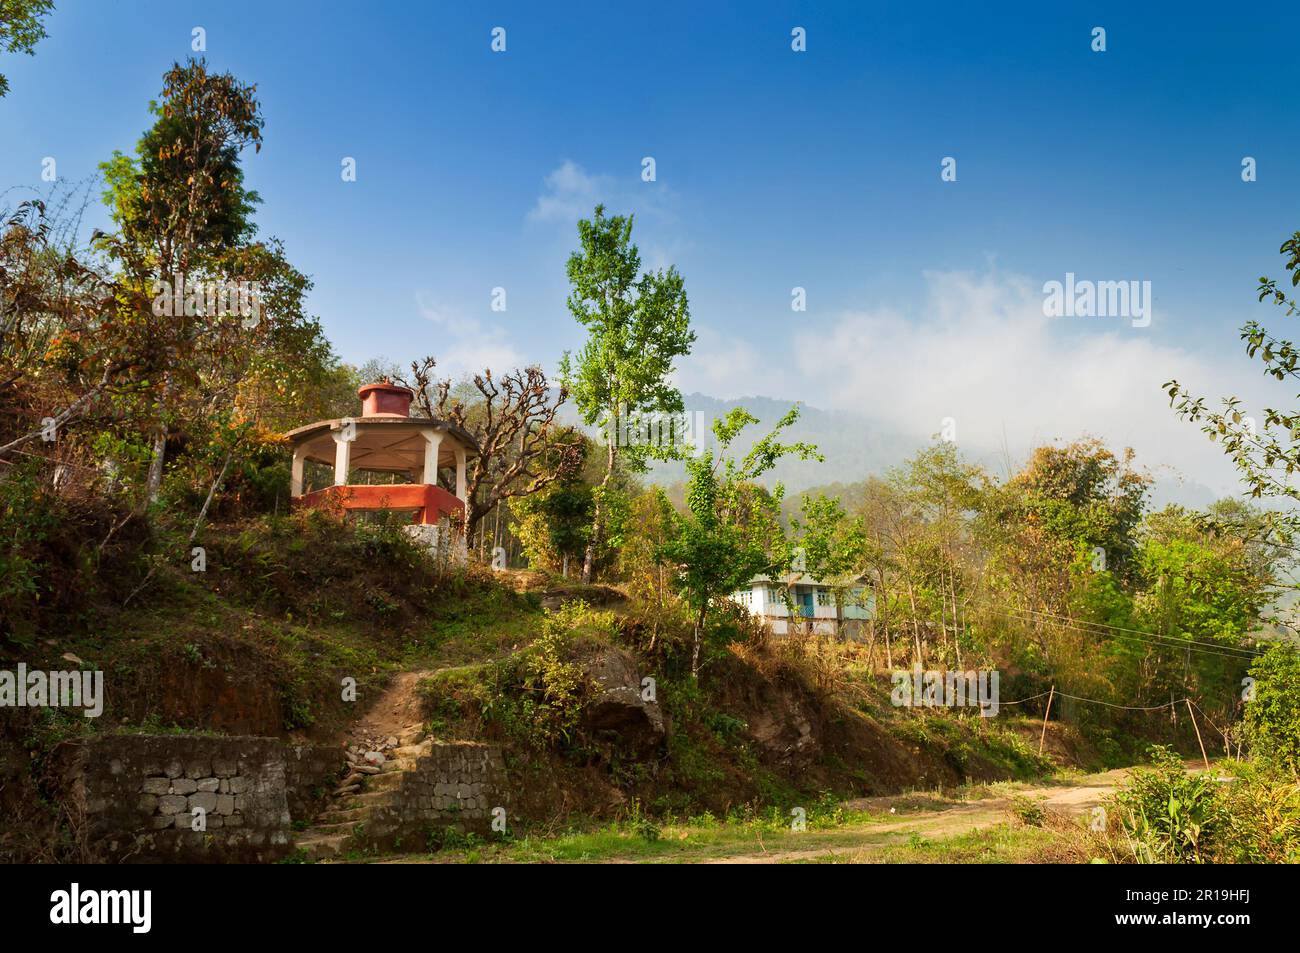 A small high altitude village at Trekking route through mountains towards Varsey Rhododendron Sanctuary or Barsey Rhododendron Sanctuary. Stock Photo